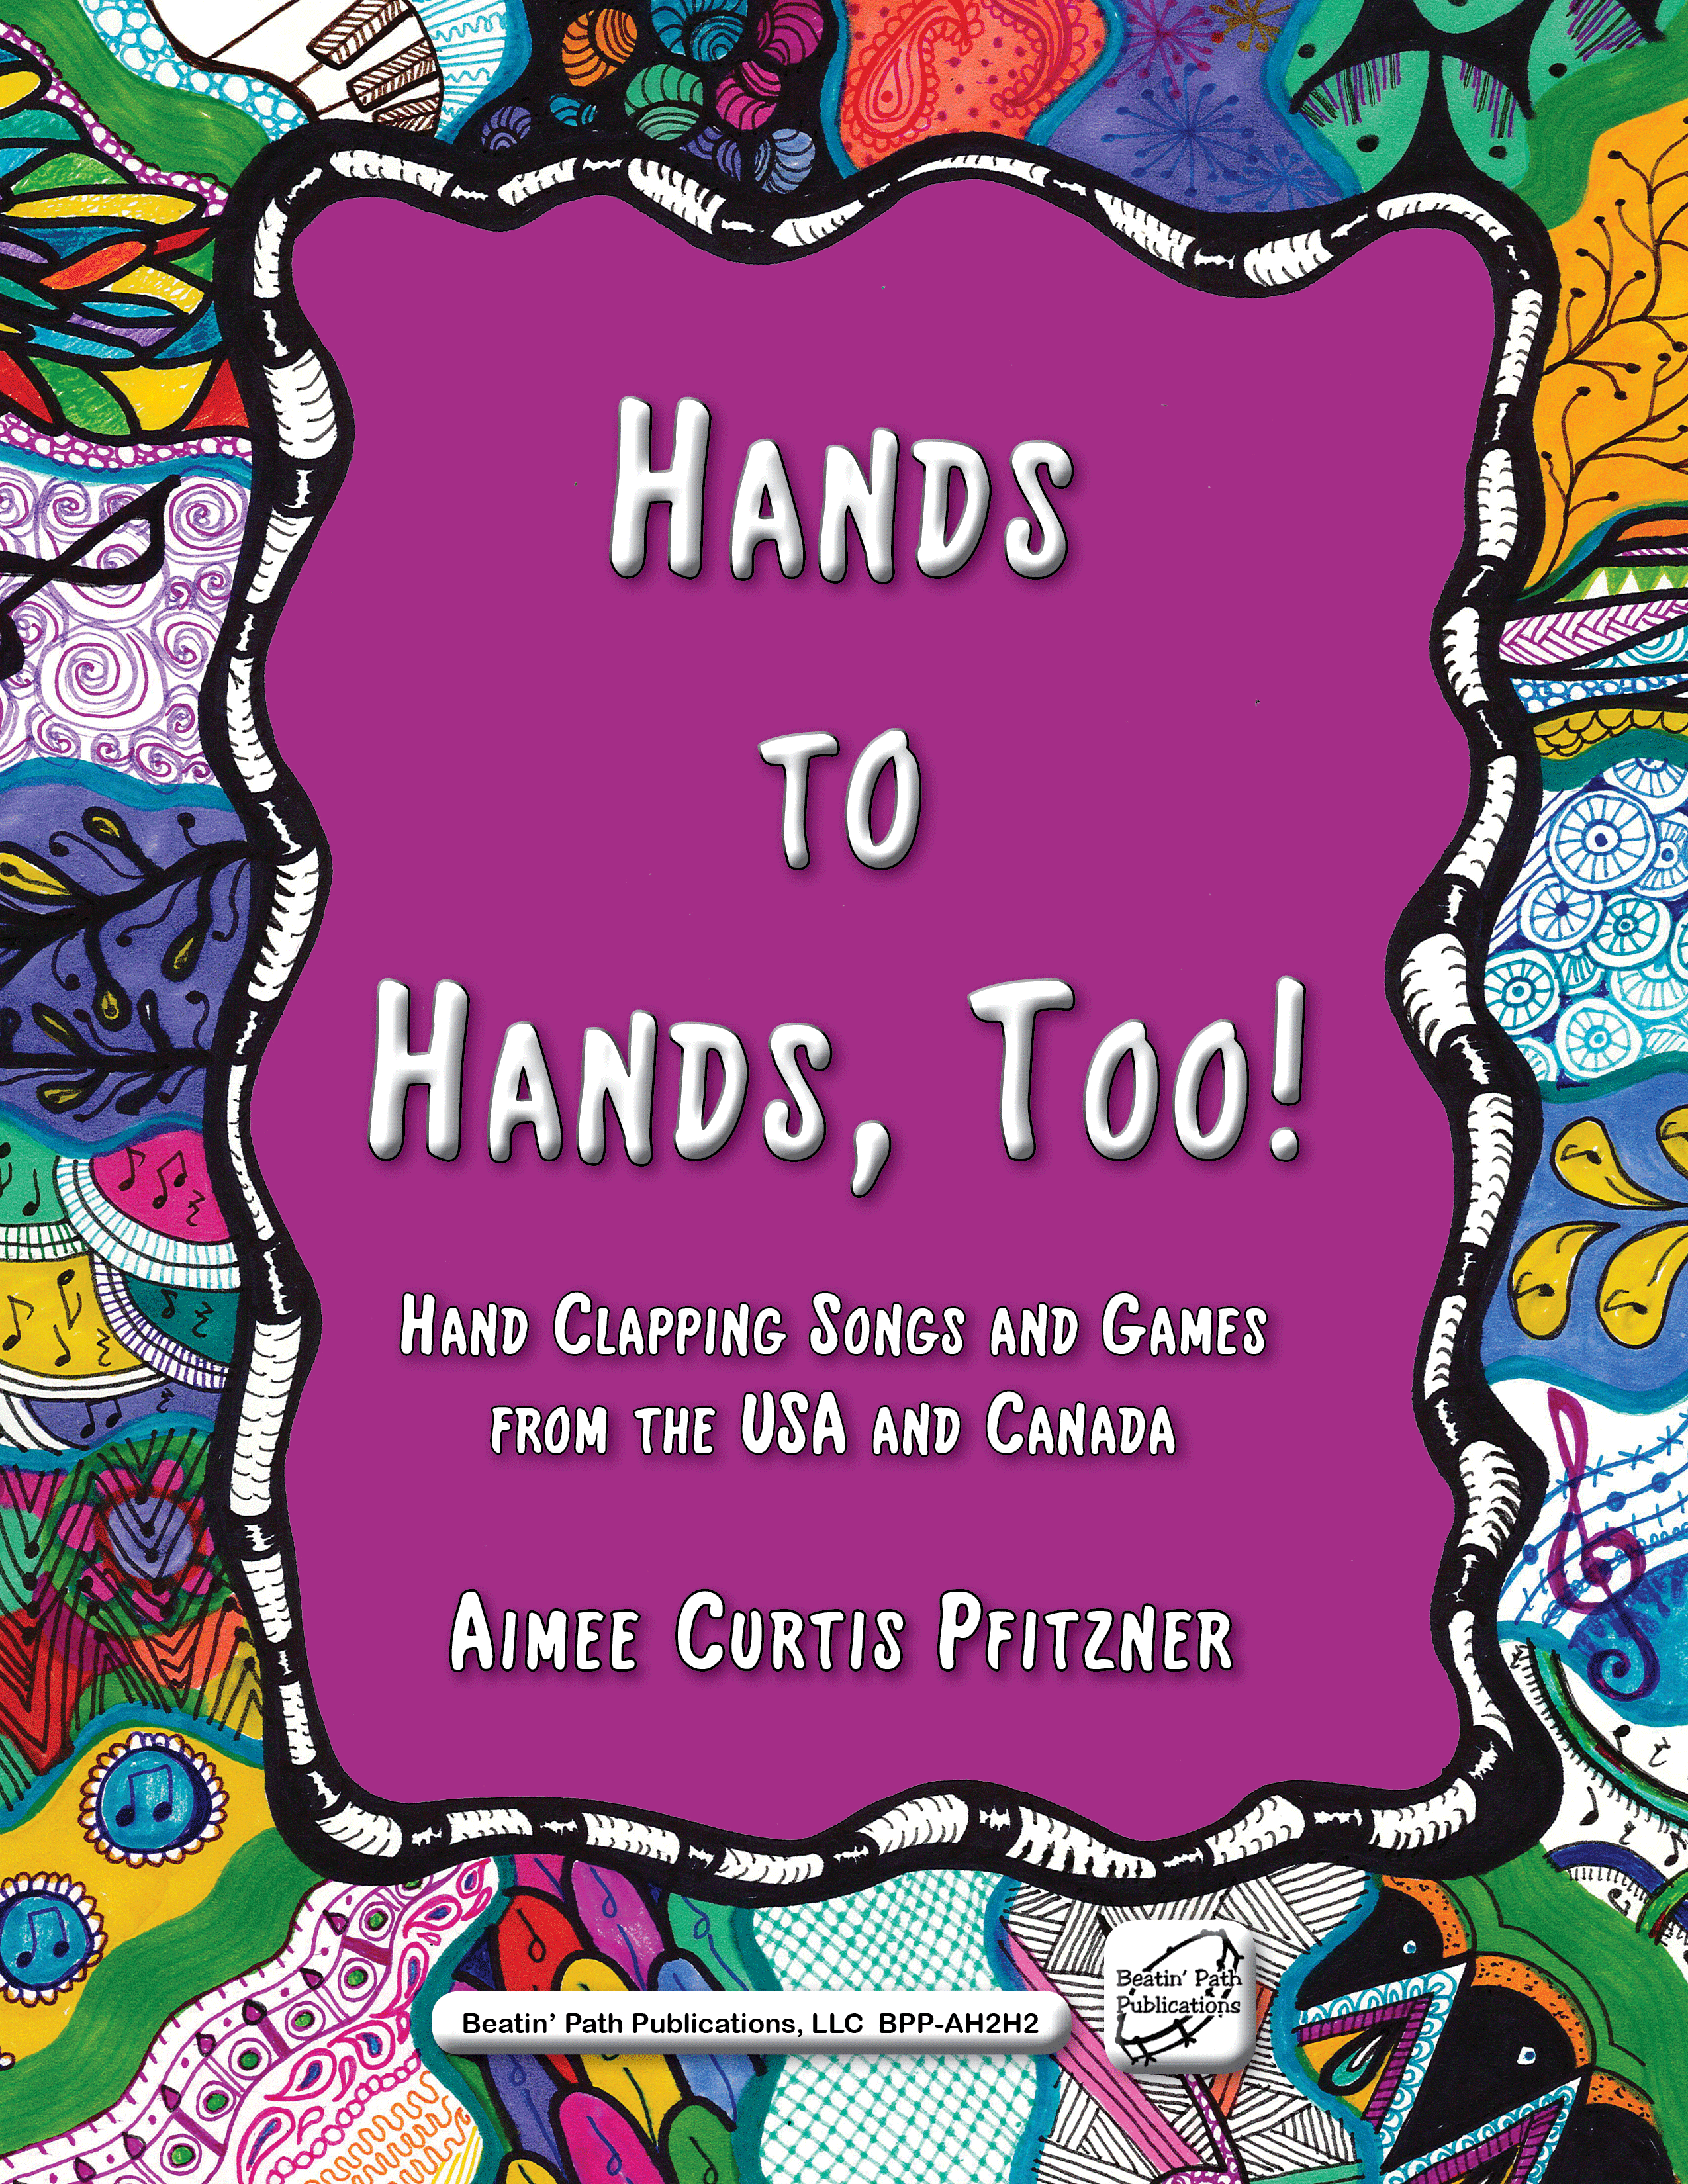 Hands to Hands, Too by Aimee Curtis Pfizner